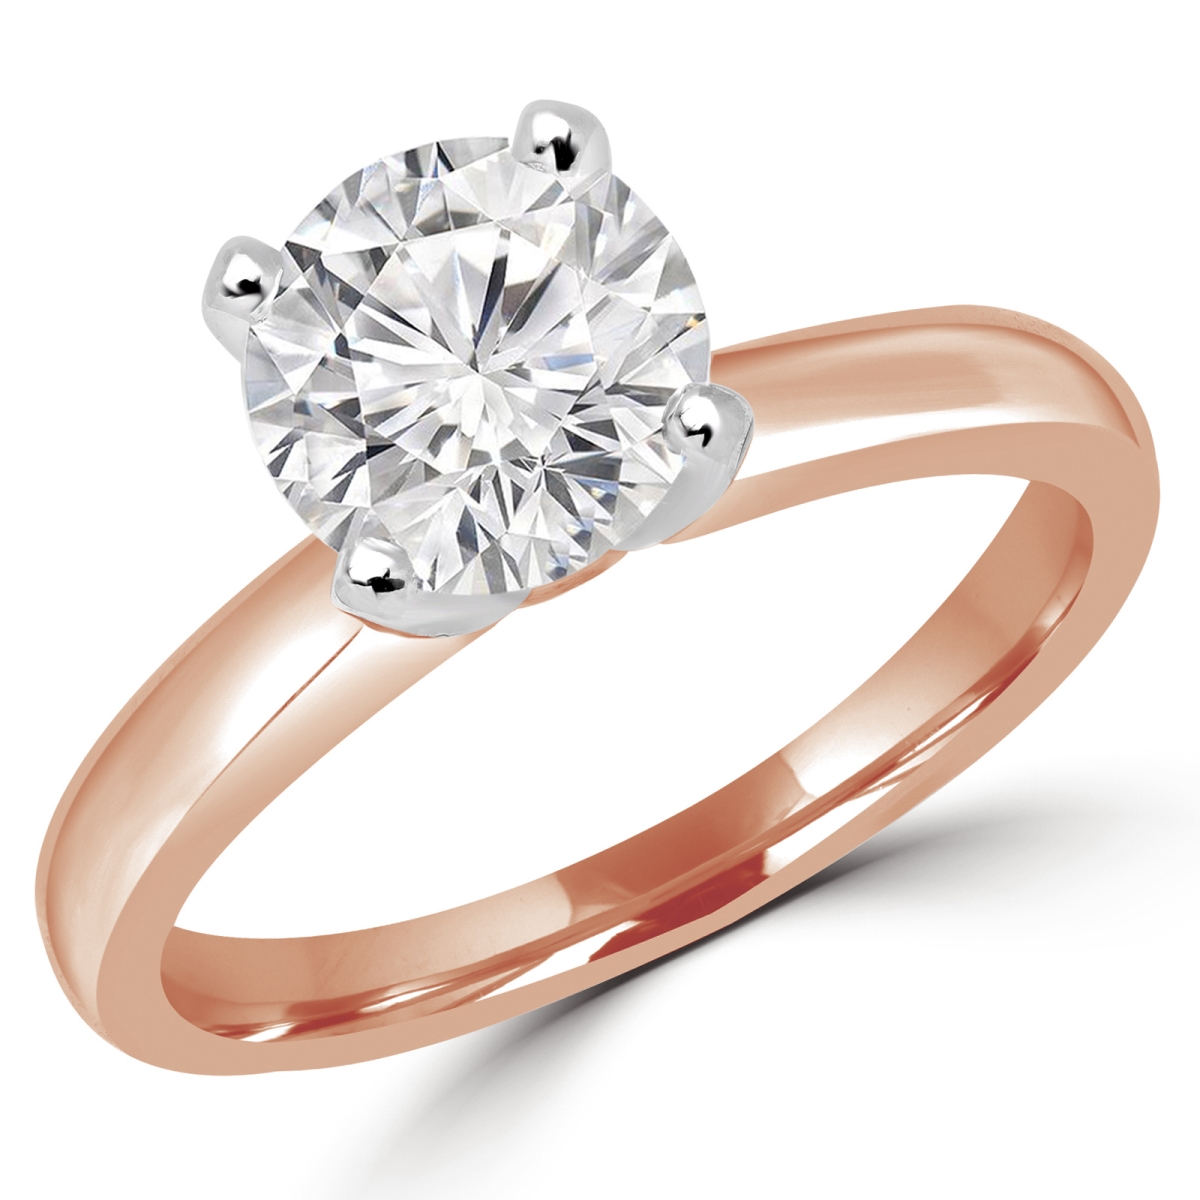 Picture of Majesty Diamonds MD180009-7.25 0.6 CT Round Diamond Solitaire Engagement Ring in 14K Rose Gold - Size 7.25